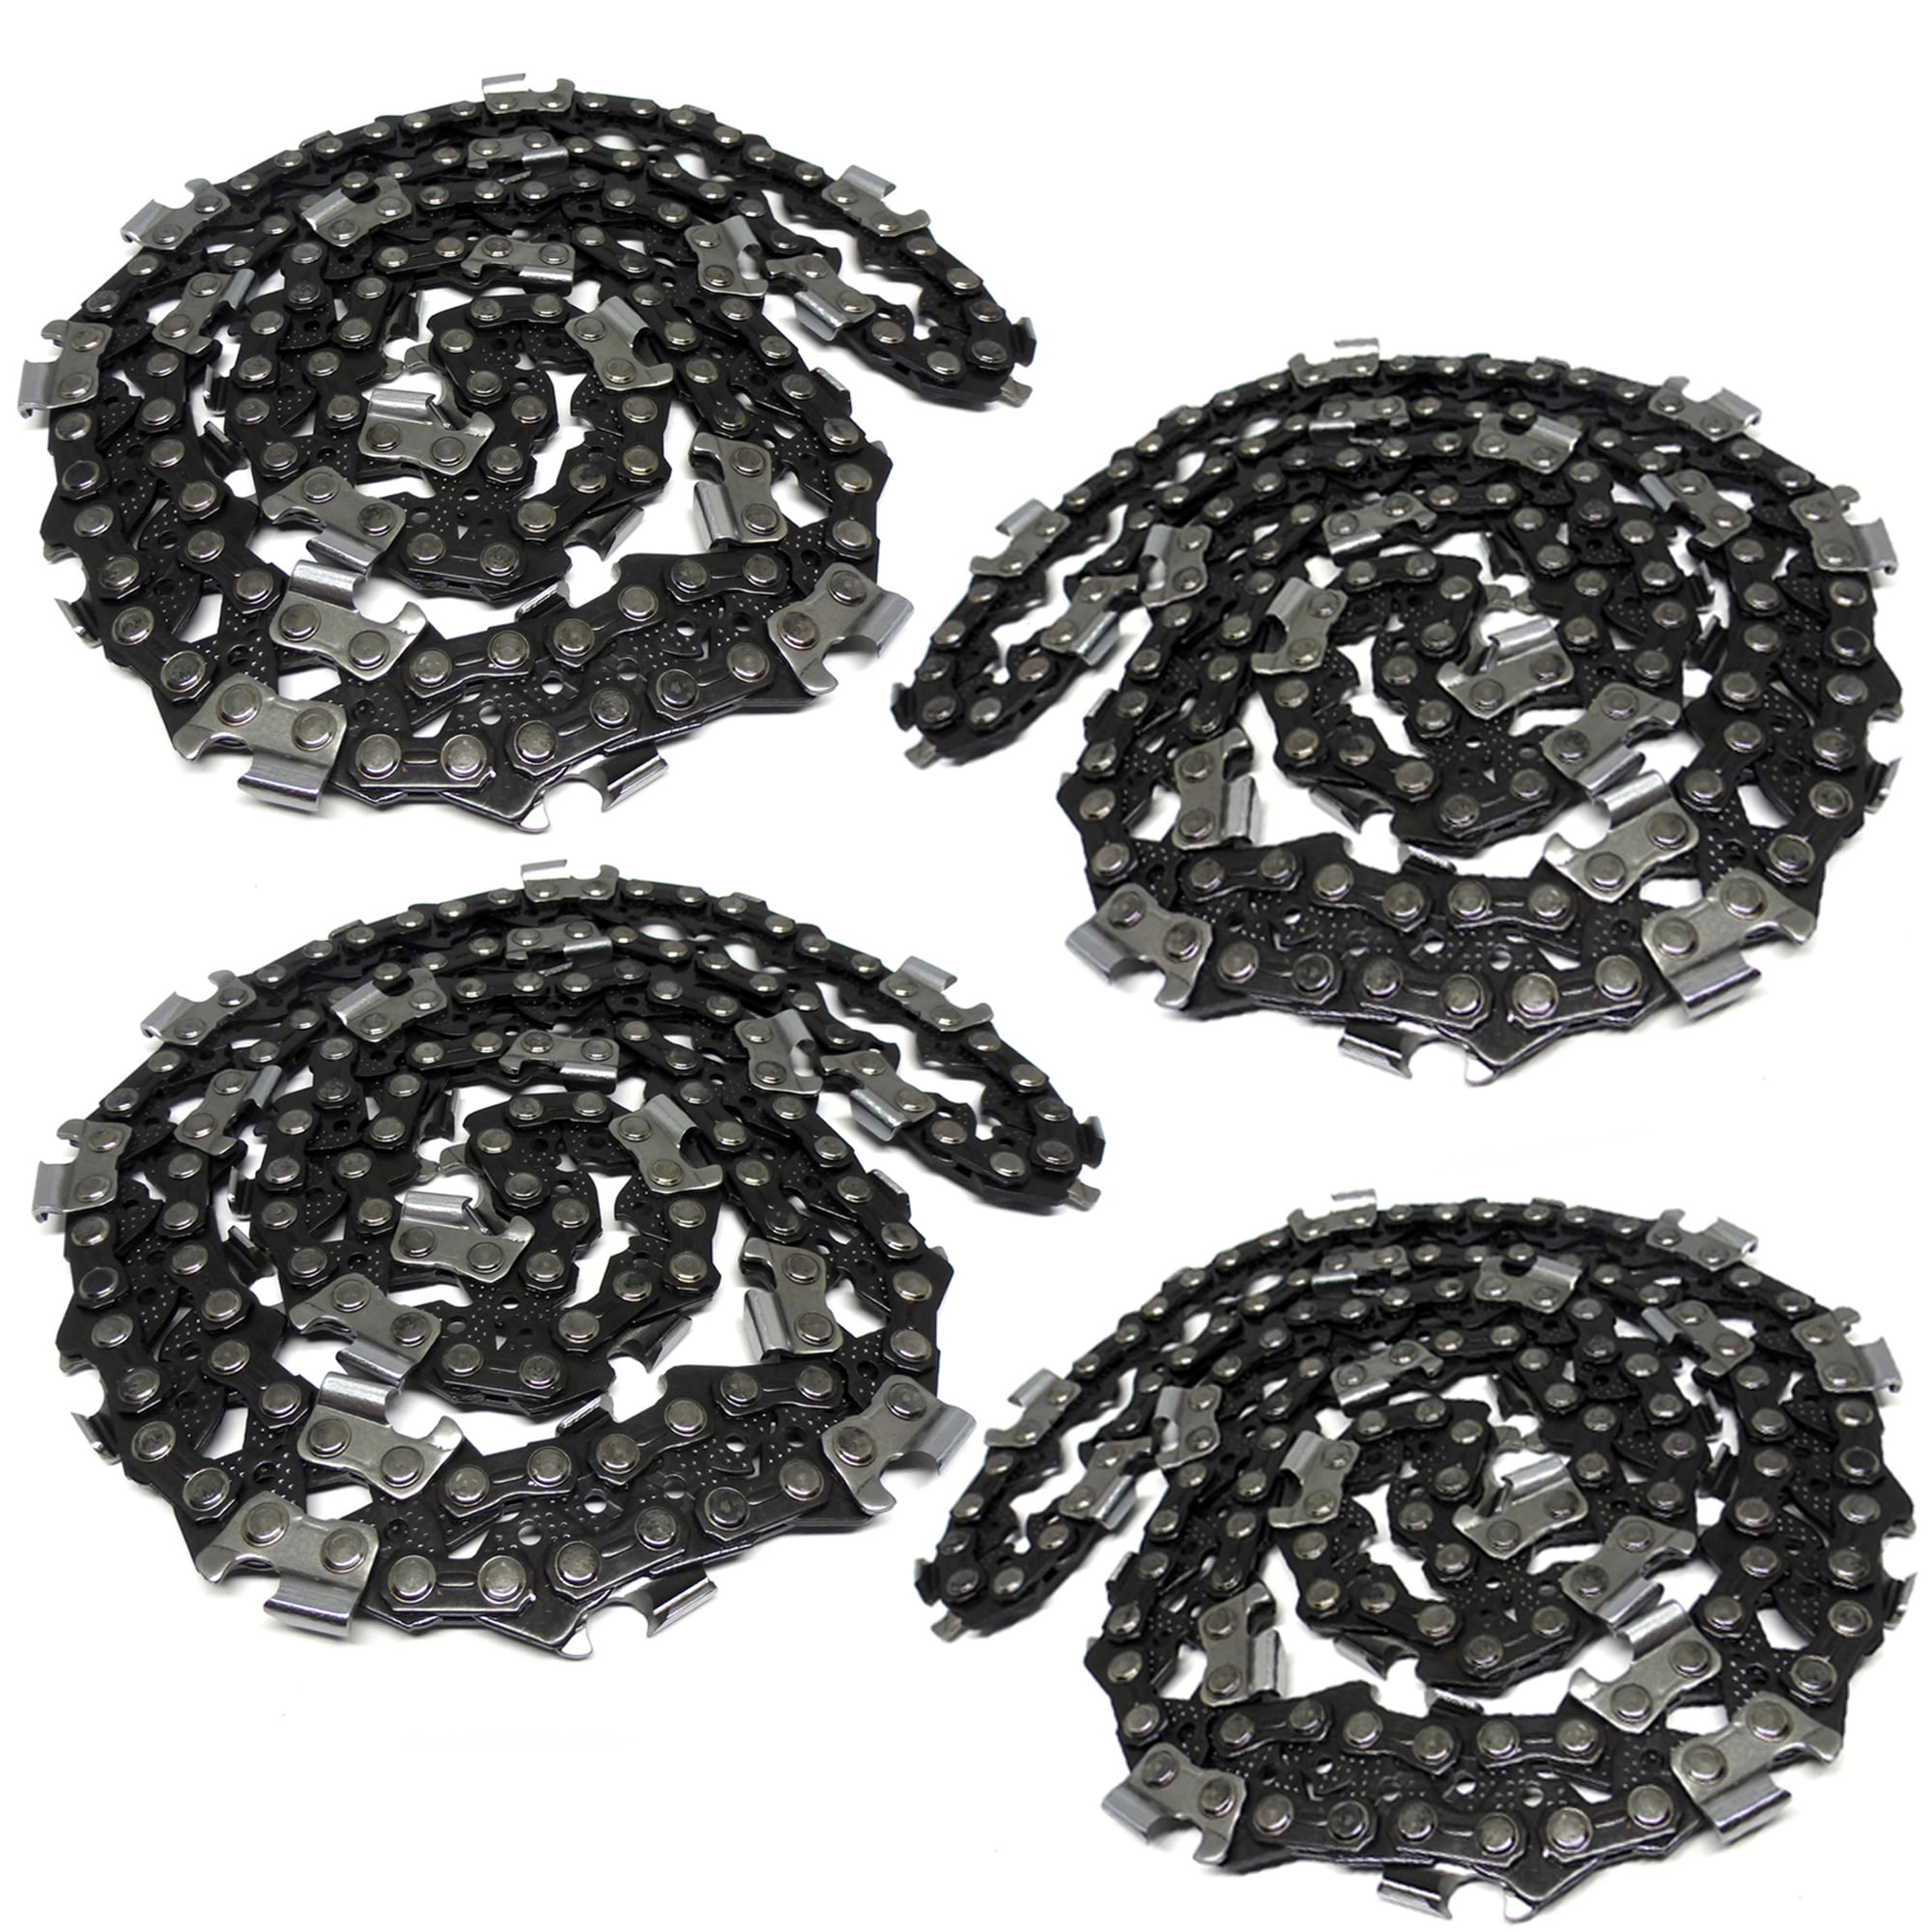 4 Oregon 72LGX072G 20" Full Chisel Chainsaw Chain Replace 33RS 72 DL 3/8 .050